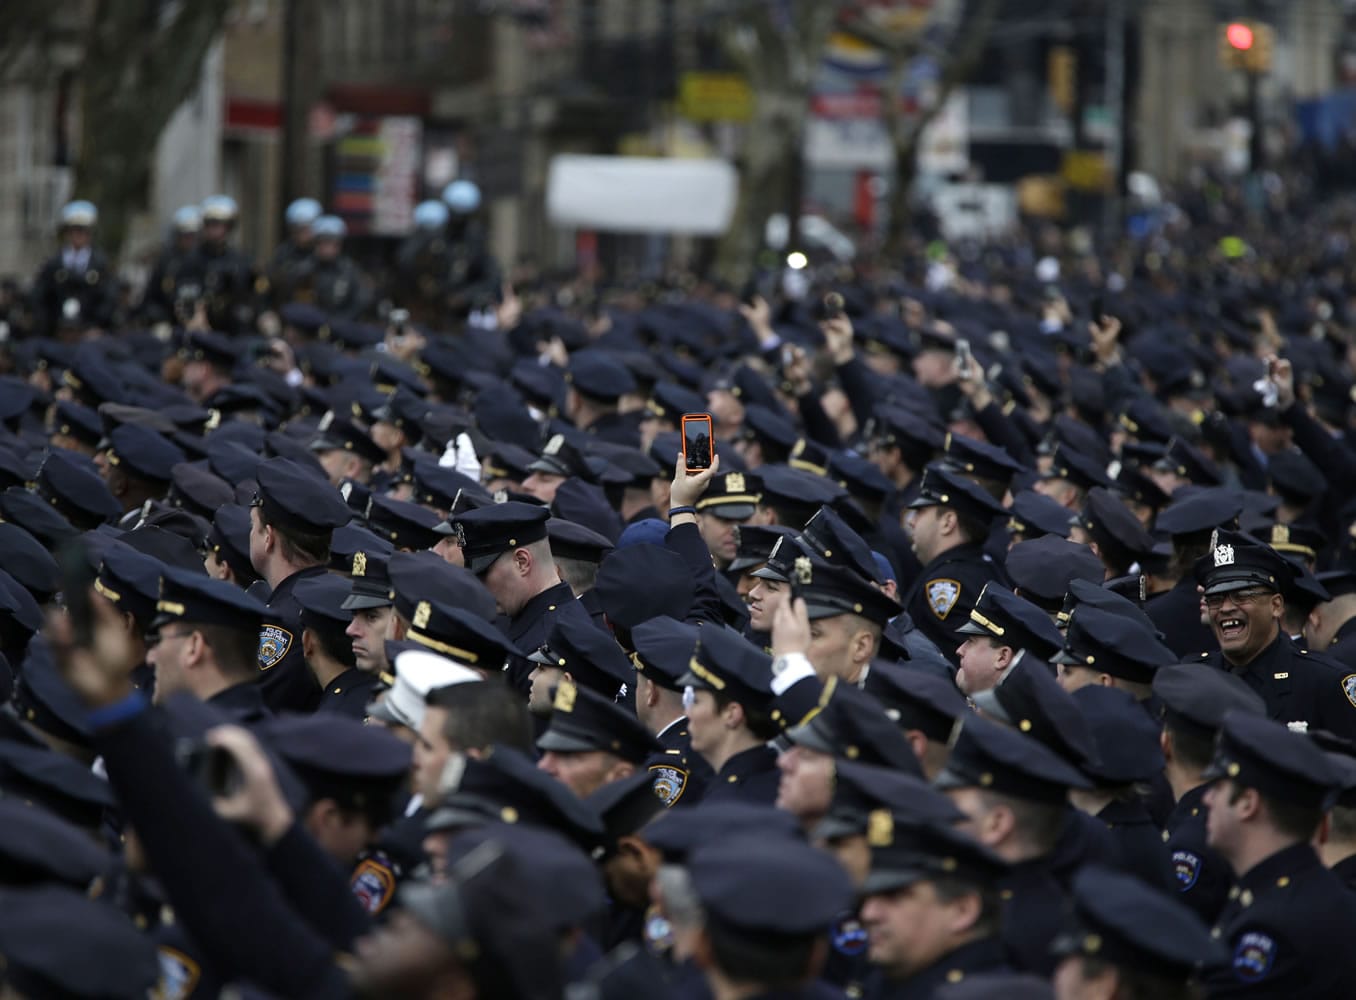 A police officer tries to take a picture above the heads of other police officers Sunday during the funeral of Officer Wenjian Liu in the Brooklyn borough of New York.